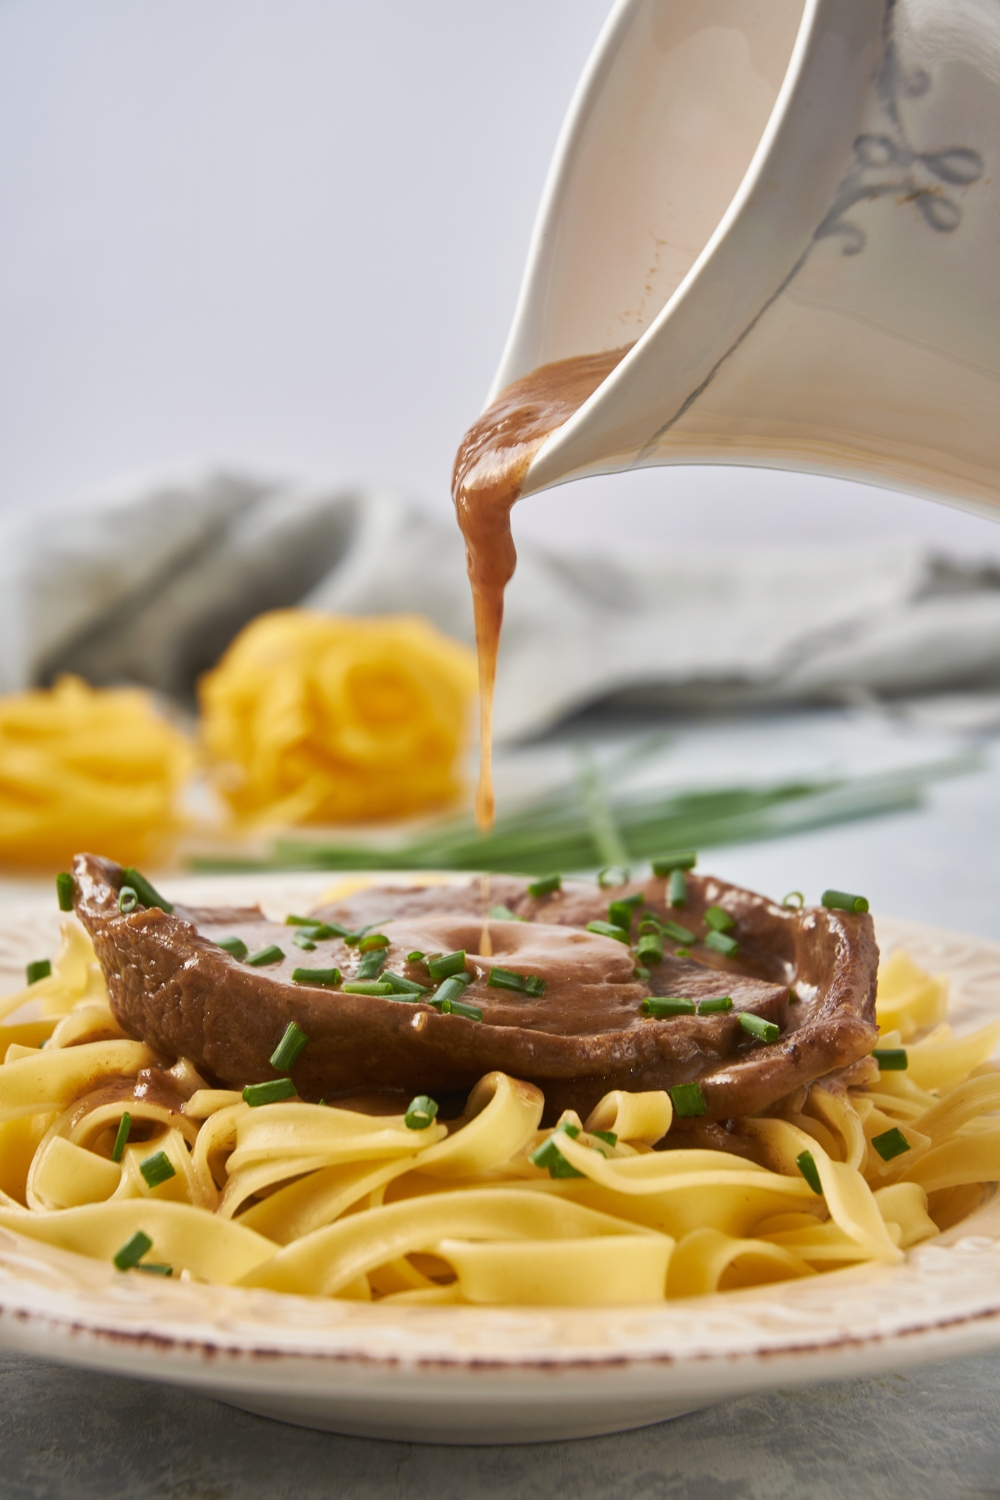 A container of gravy being poured over a cube steak covered in gravy with a bed of linguini noodles beneath it. Gravy is spilling from the container onto the steak.